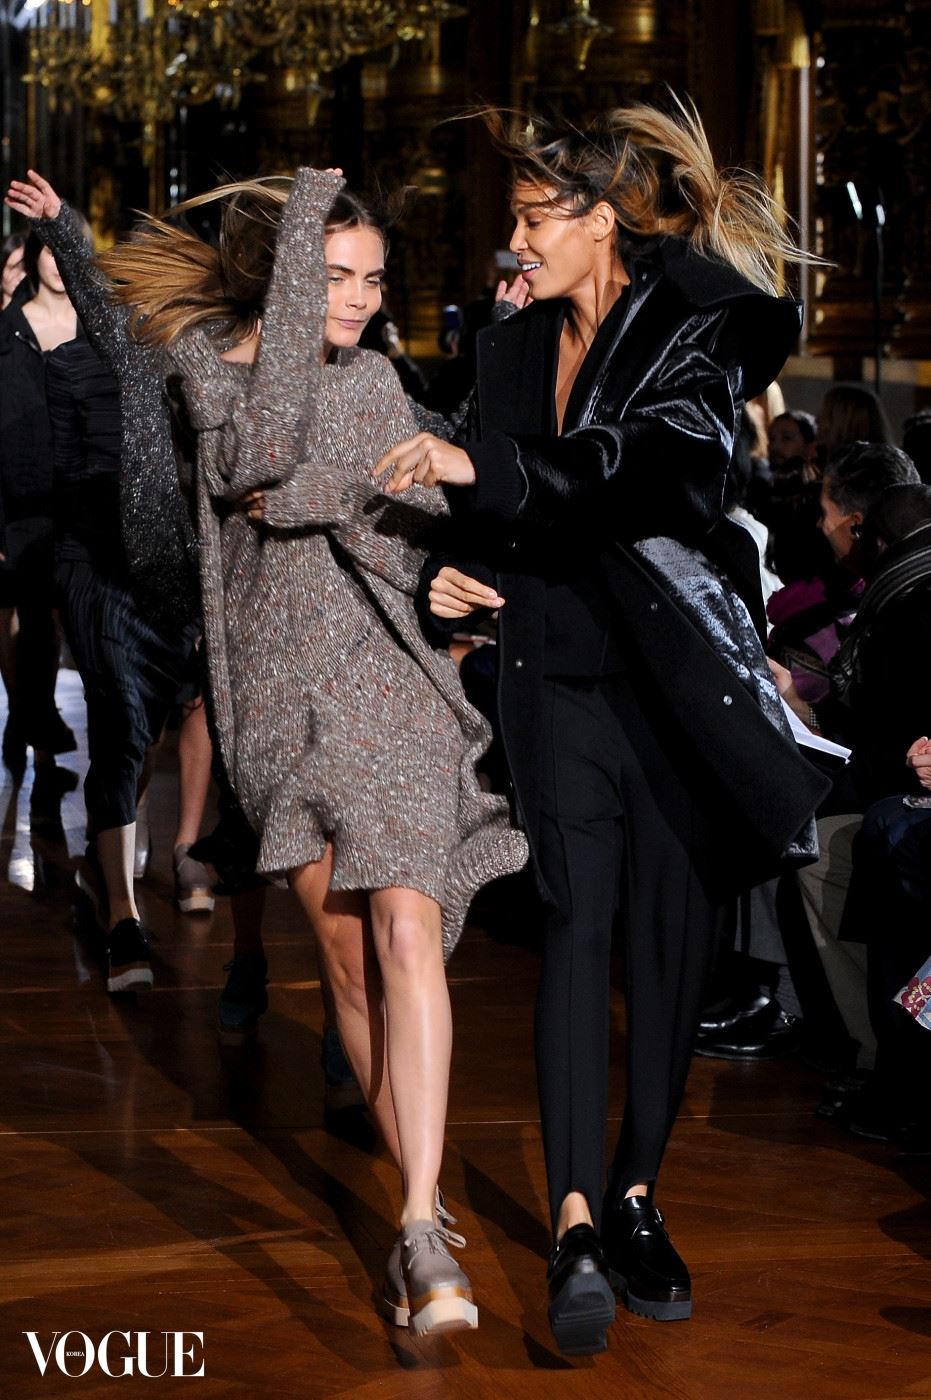 PARIS, FRANCE - MARCH 03:  Joan Smalles and Cara Delevigne walk the runway during the Stella McCartney show as part of the Paris Fashion Week Womenswear Fall/Winter 2014-2015  on March 3, 2014 in Paris, France.  (Photo by Francois Durand/Getty Images)